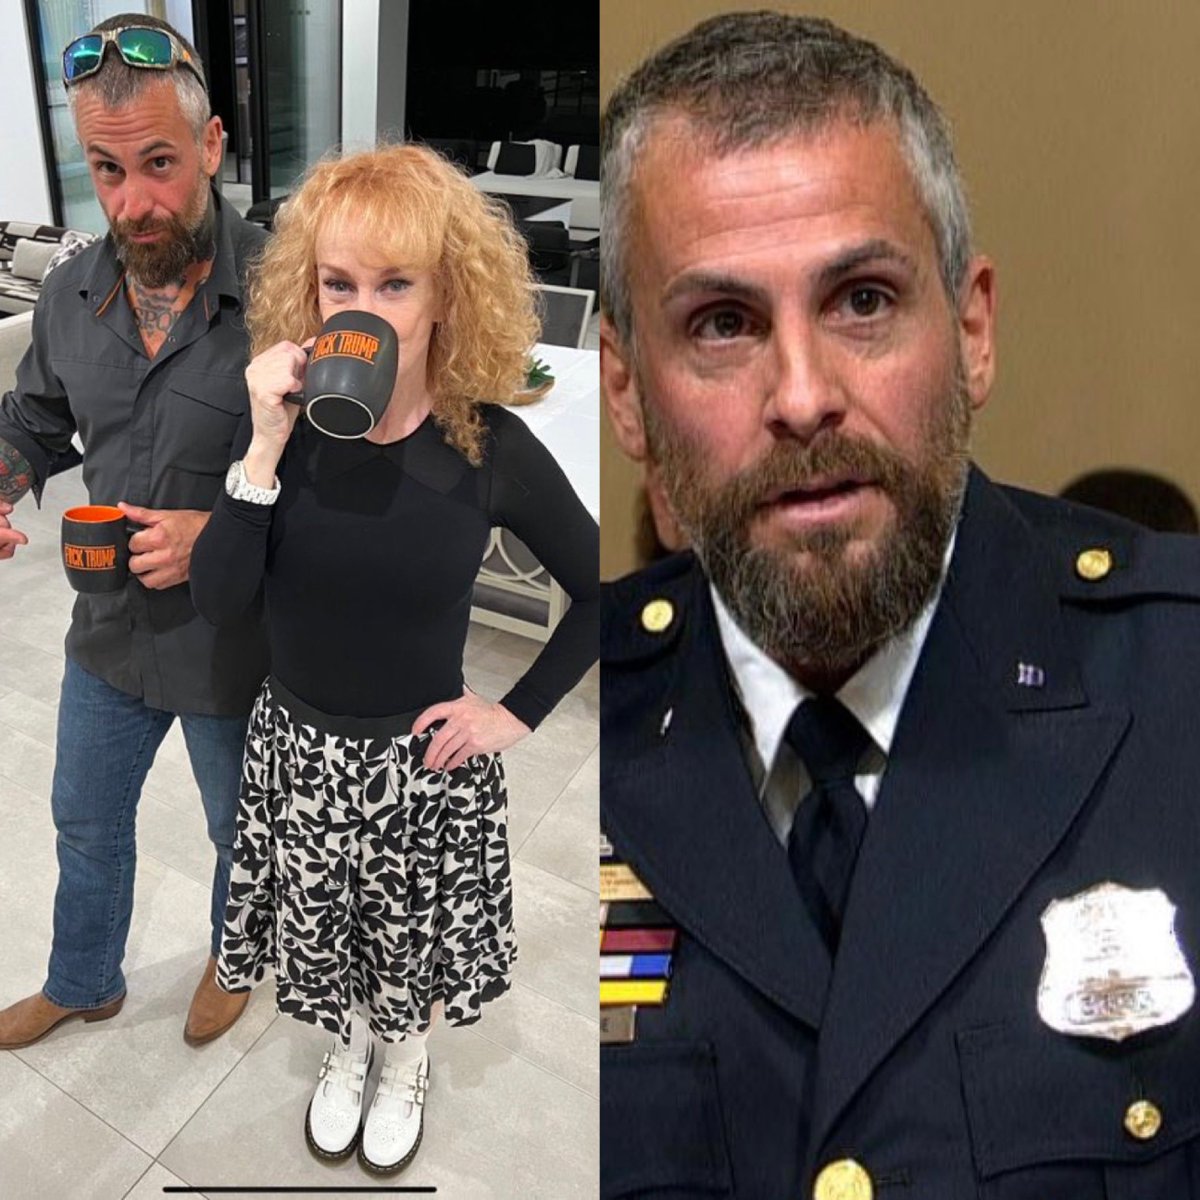 Kathy Griffin hanging out with the Jan 6th Capitol Police officer. They are drinking out of F** Trump mugs. He testified during the Jan 6th hearings. I don’t trust anything that comes out of his mouth and I don’t believe everything they say about Jan 6th. Who’s with me ✋